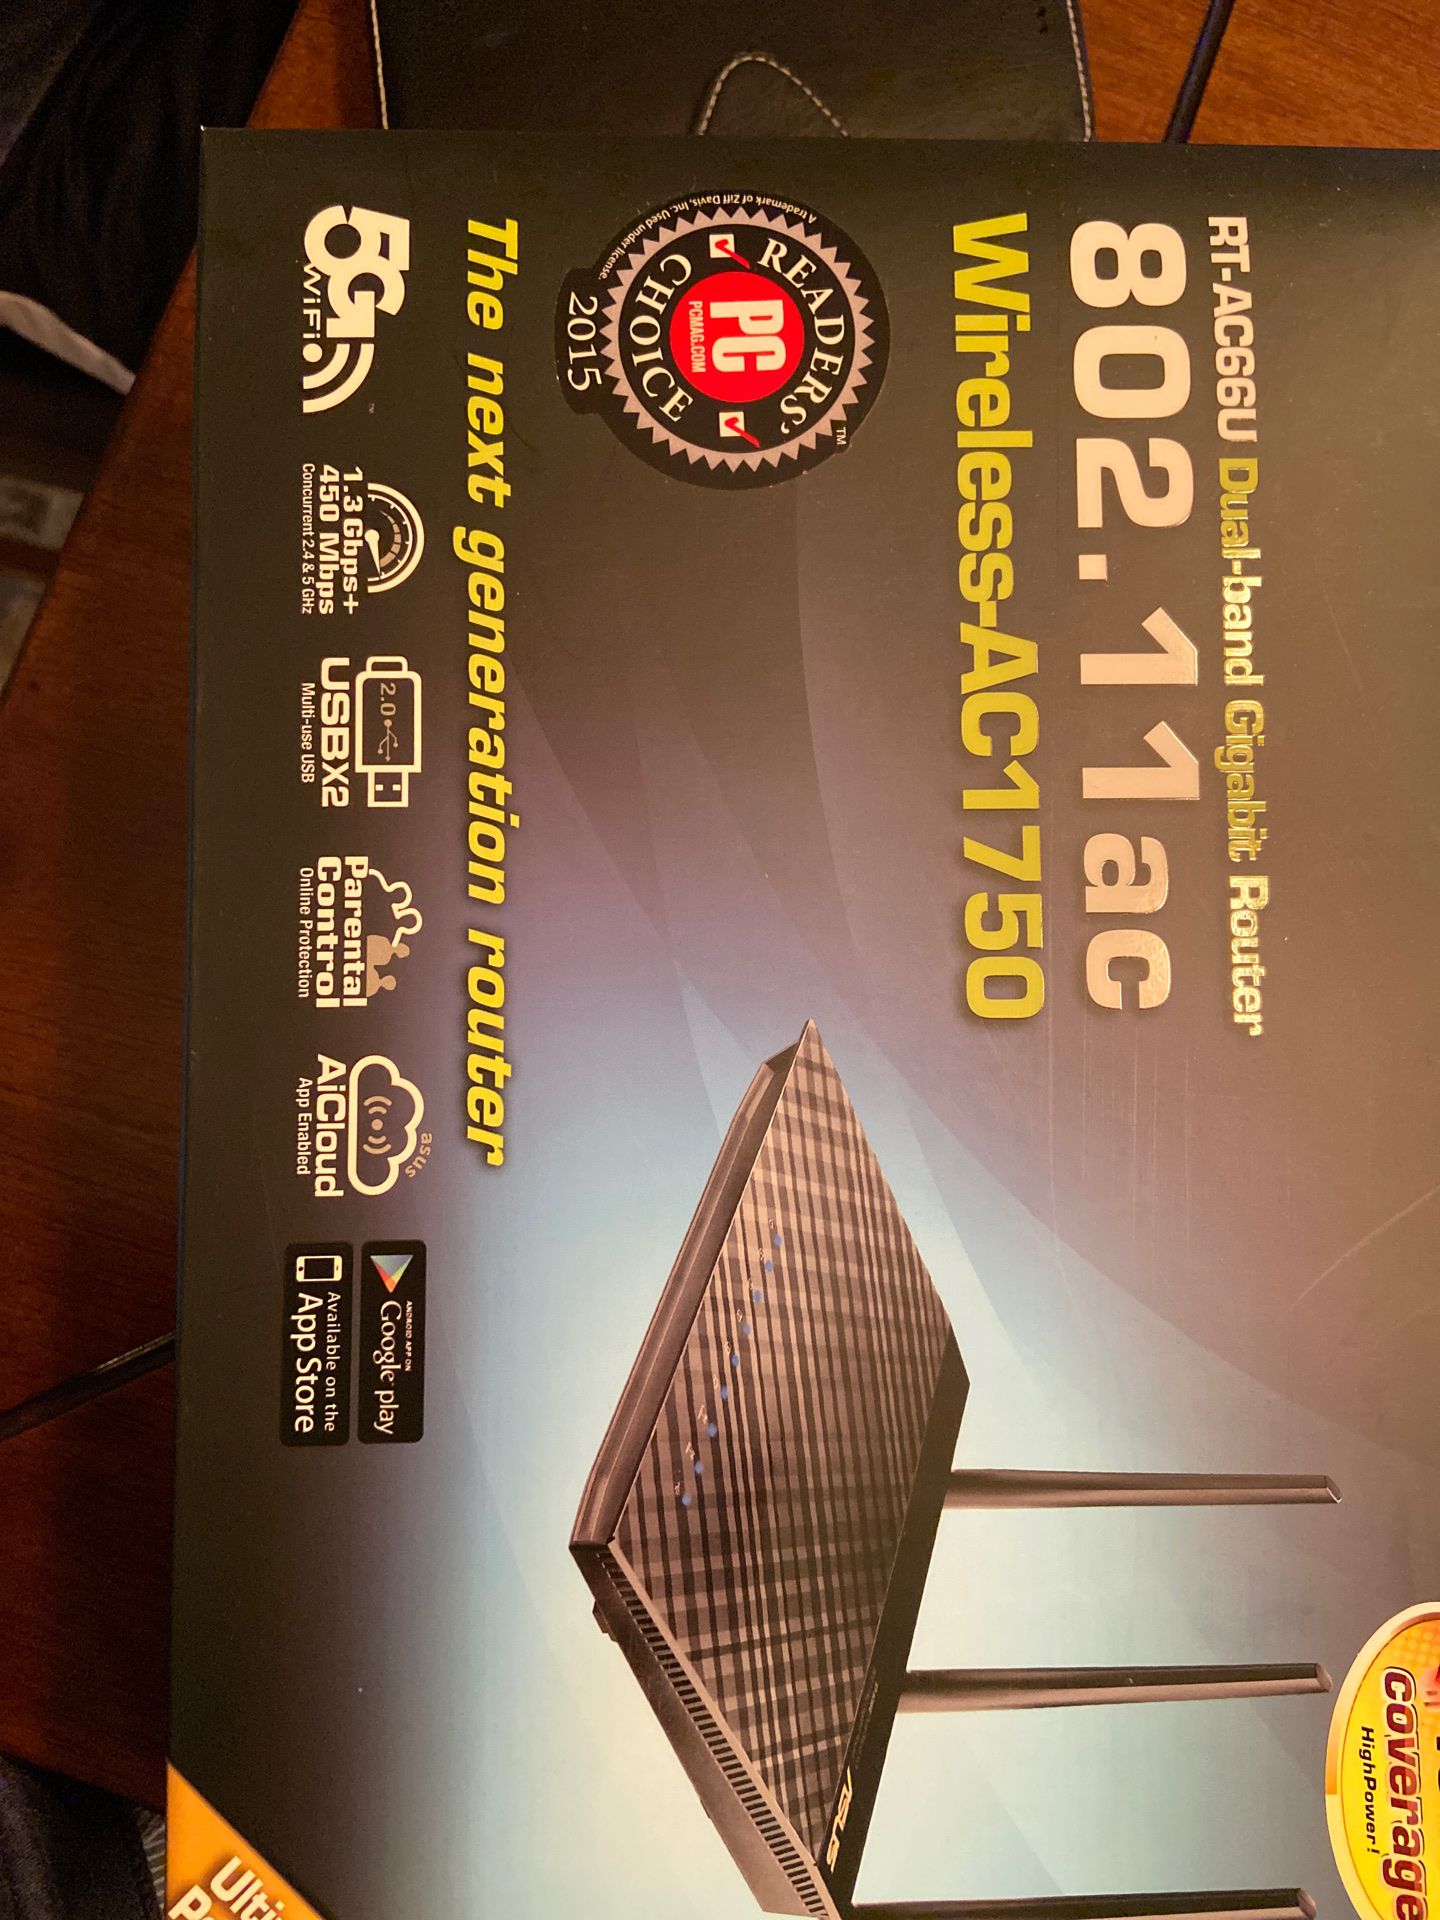 Asus Wireless AC1750 GB Router